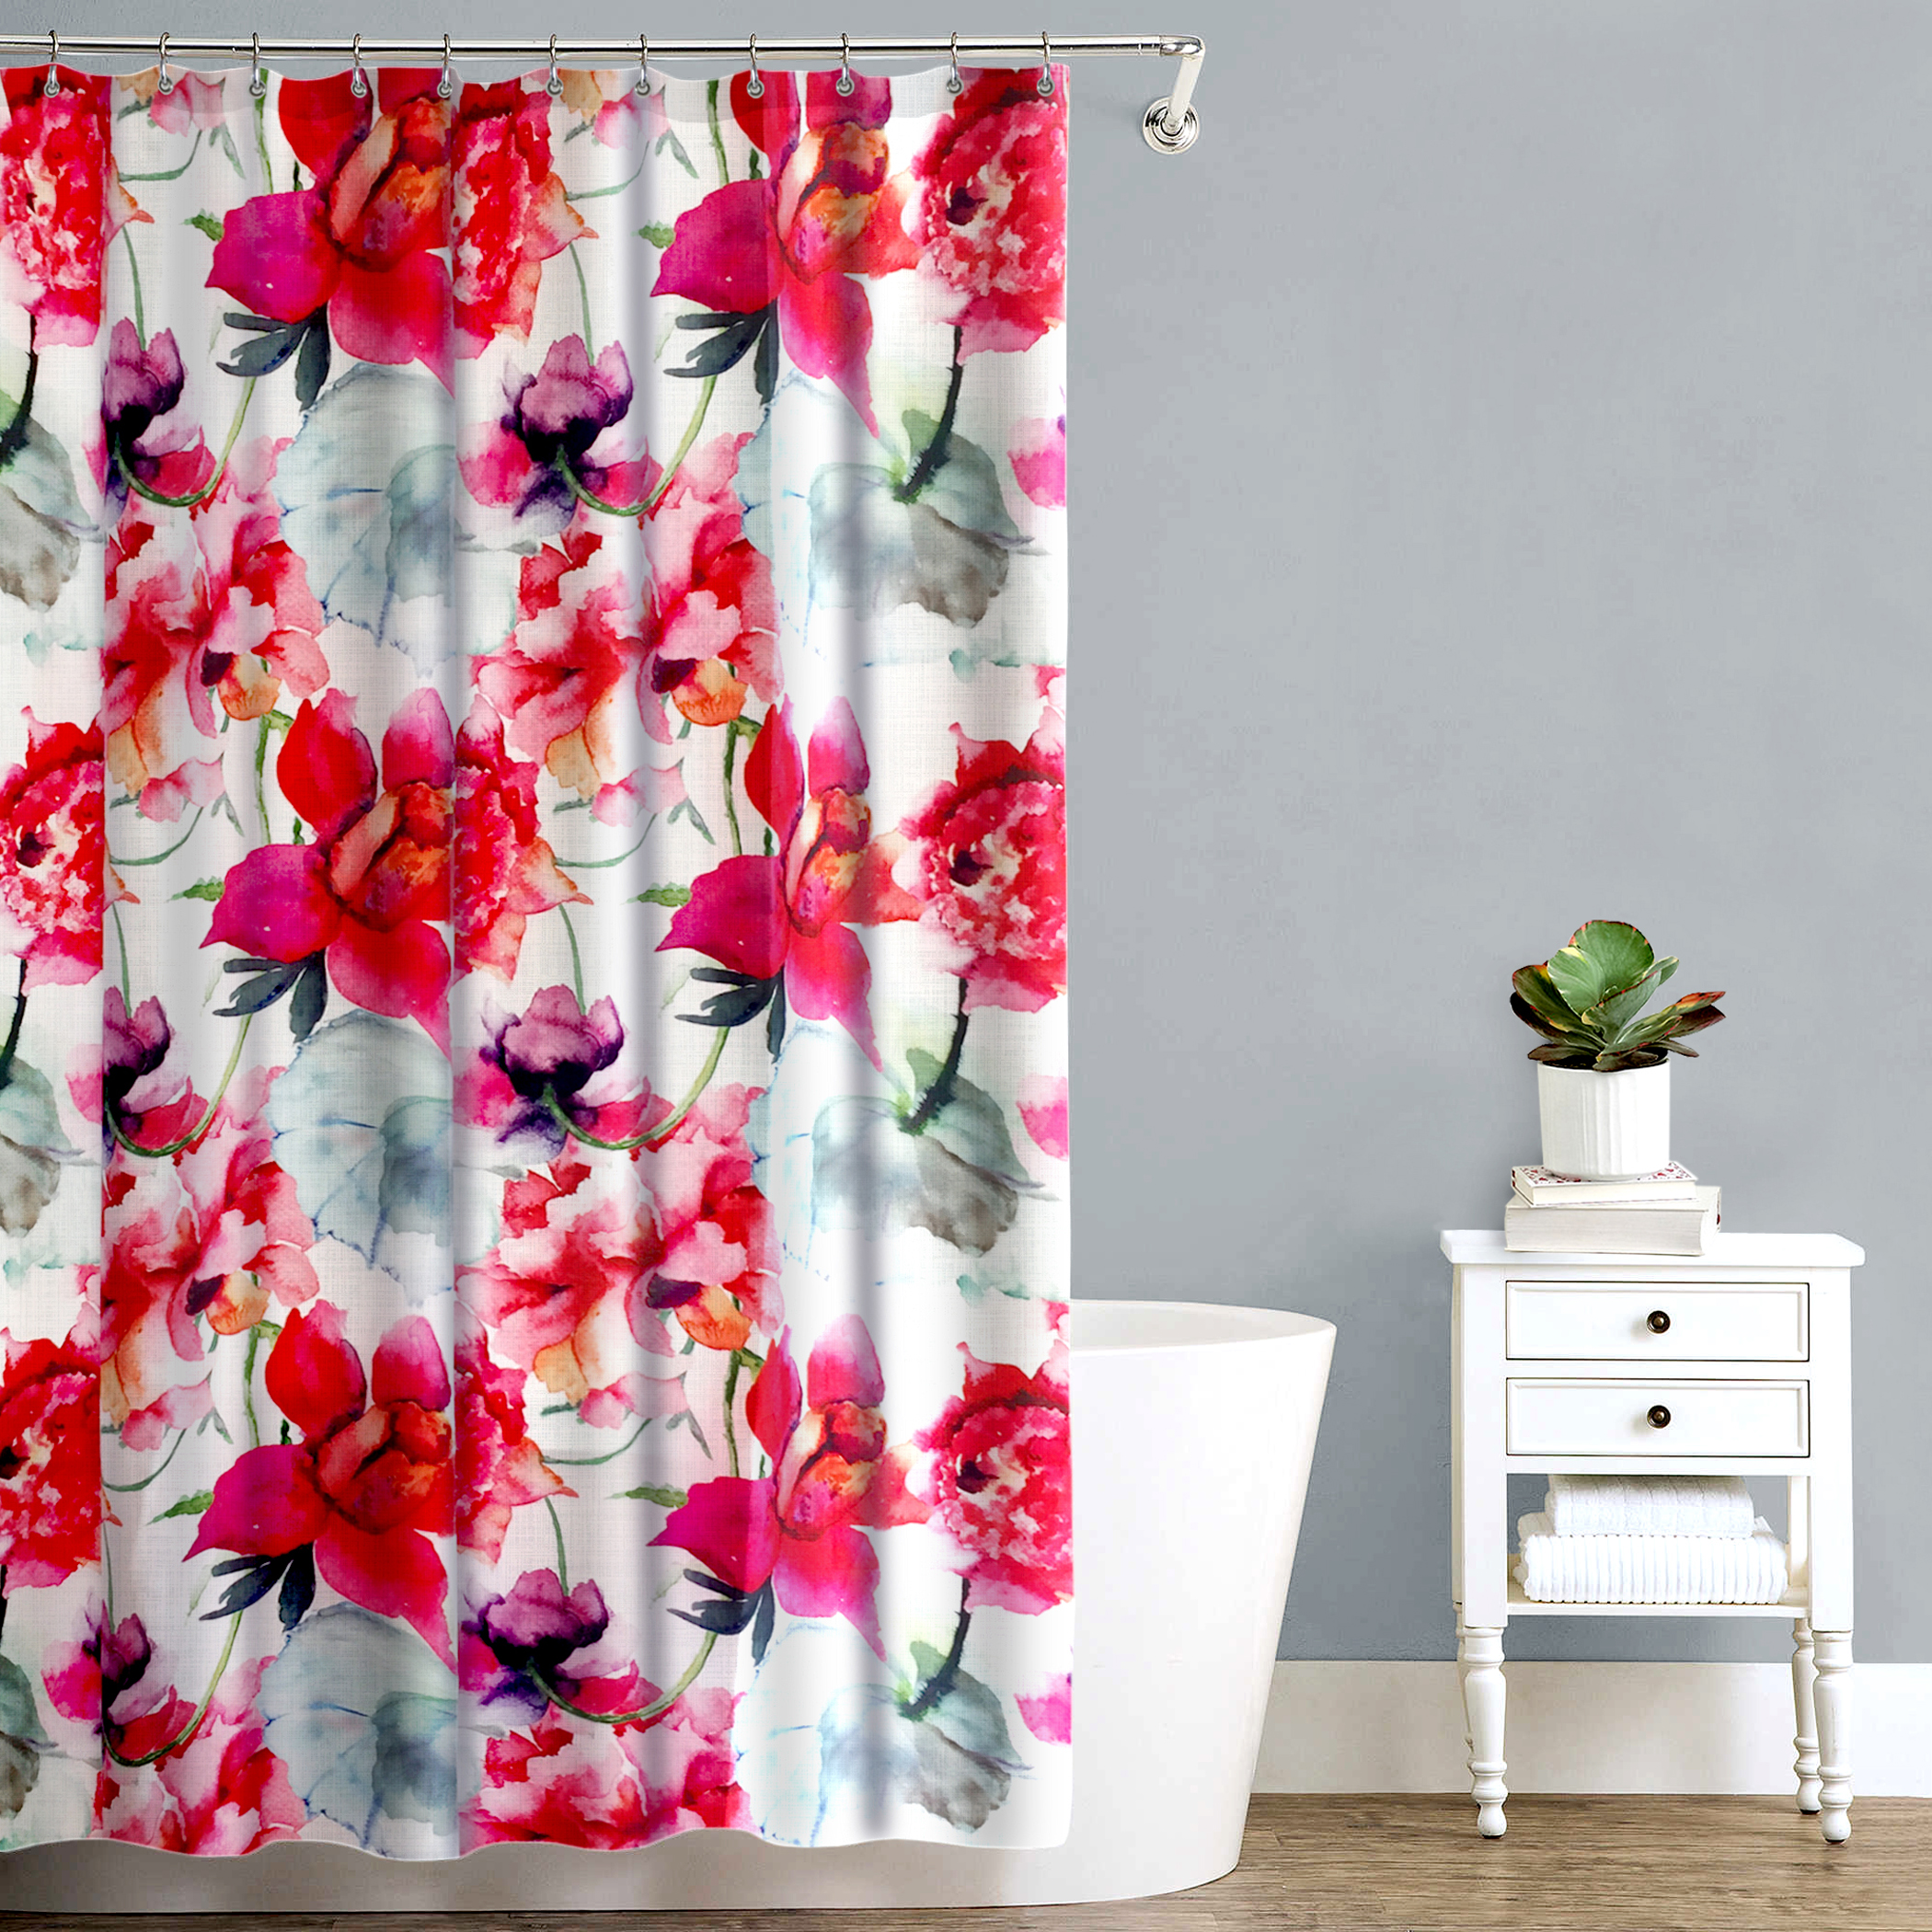 Splash Home Touch of Rose Polyester Fabric Shower Curtain 70 x 72 - Pink - image 2 of 8